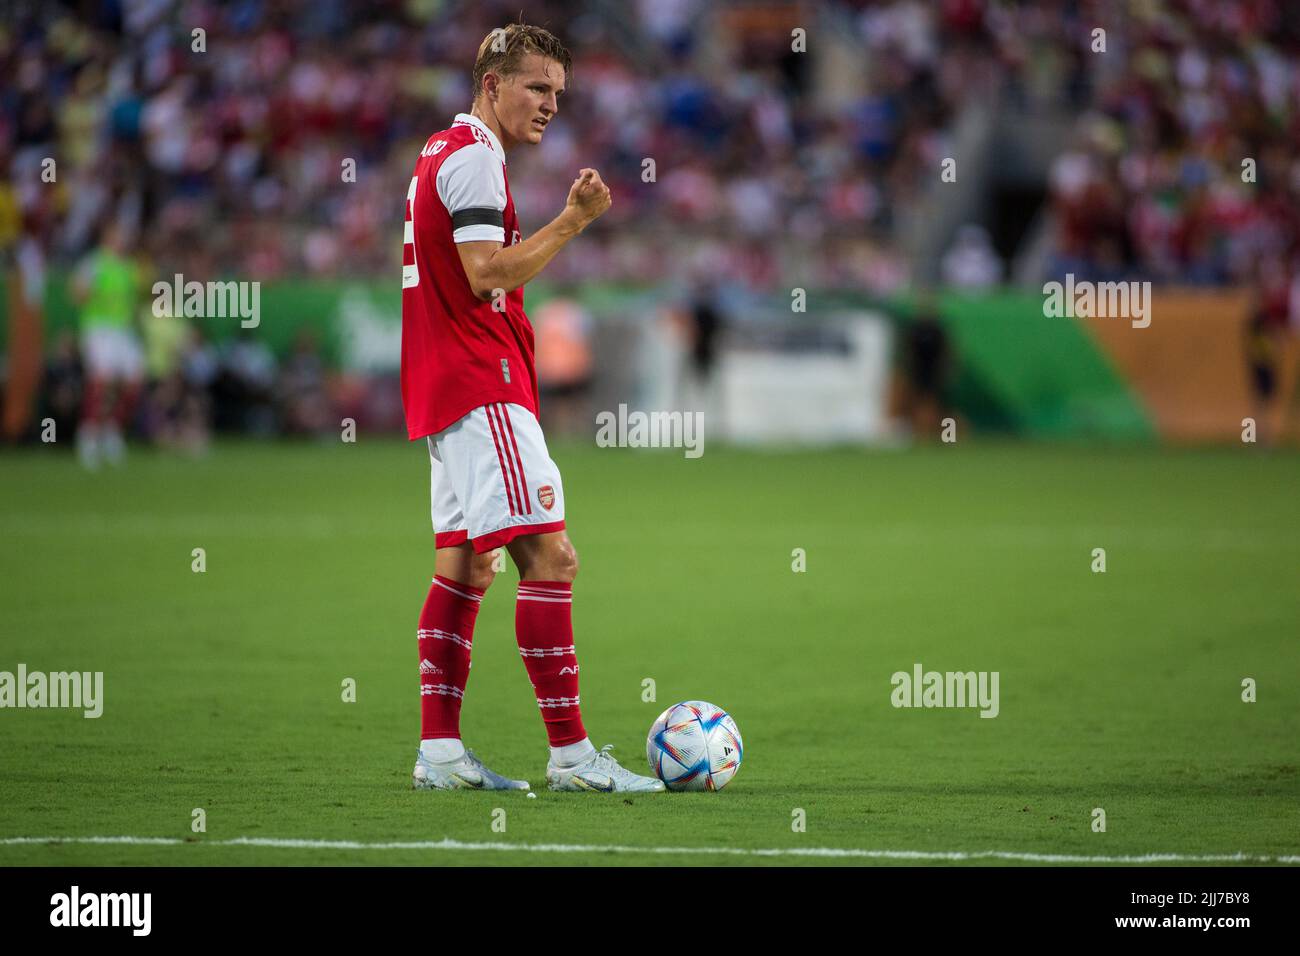 July 23, 2022: Arsenal FC midfielder Martin Odegaard (8) gets ready to start the action during the Florida Cup match between Arsenal FC and Chelsea FC Orlando, FL. Jonathan Huff/CSM. Stock Photo